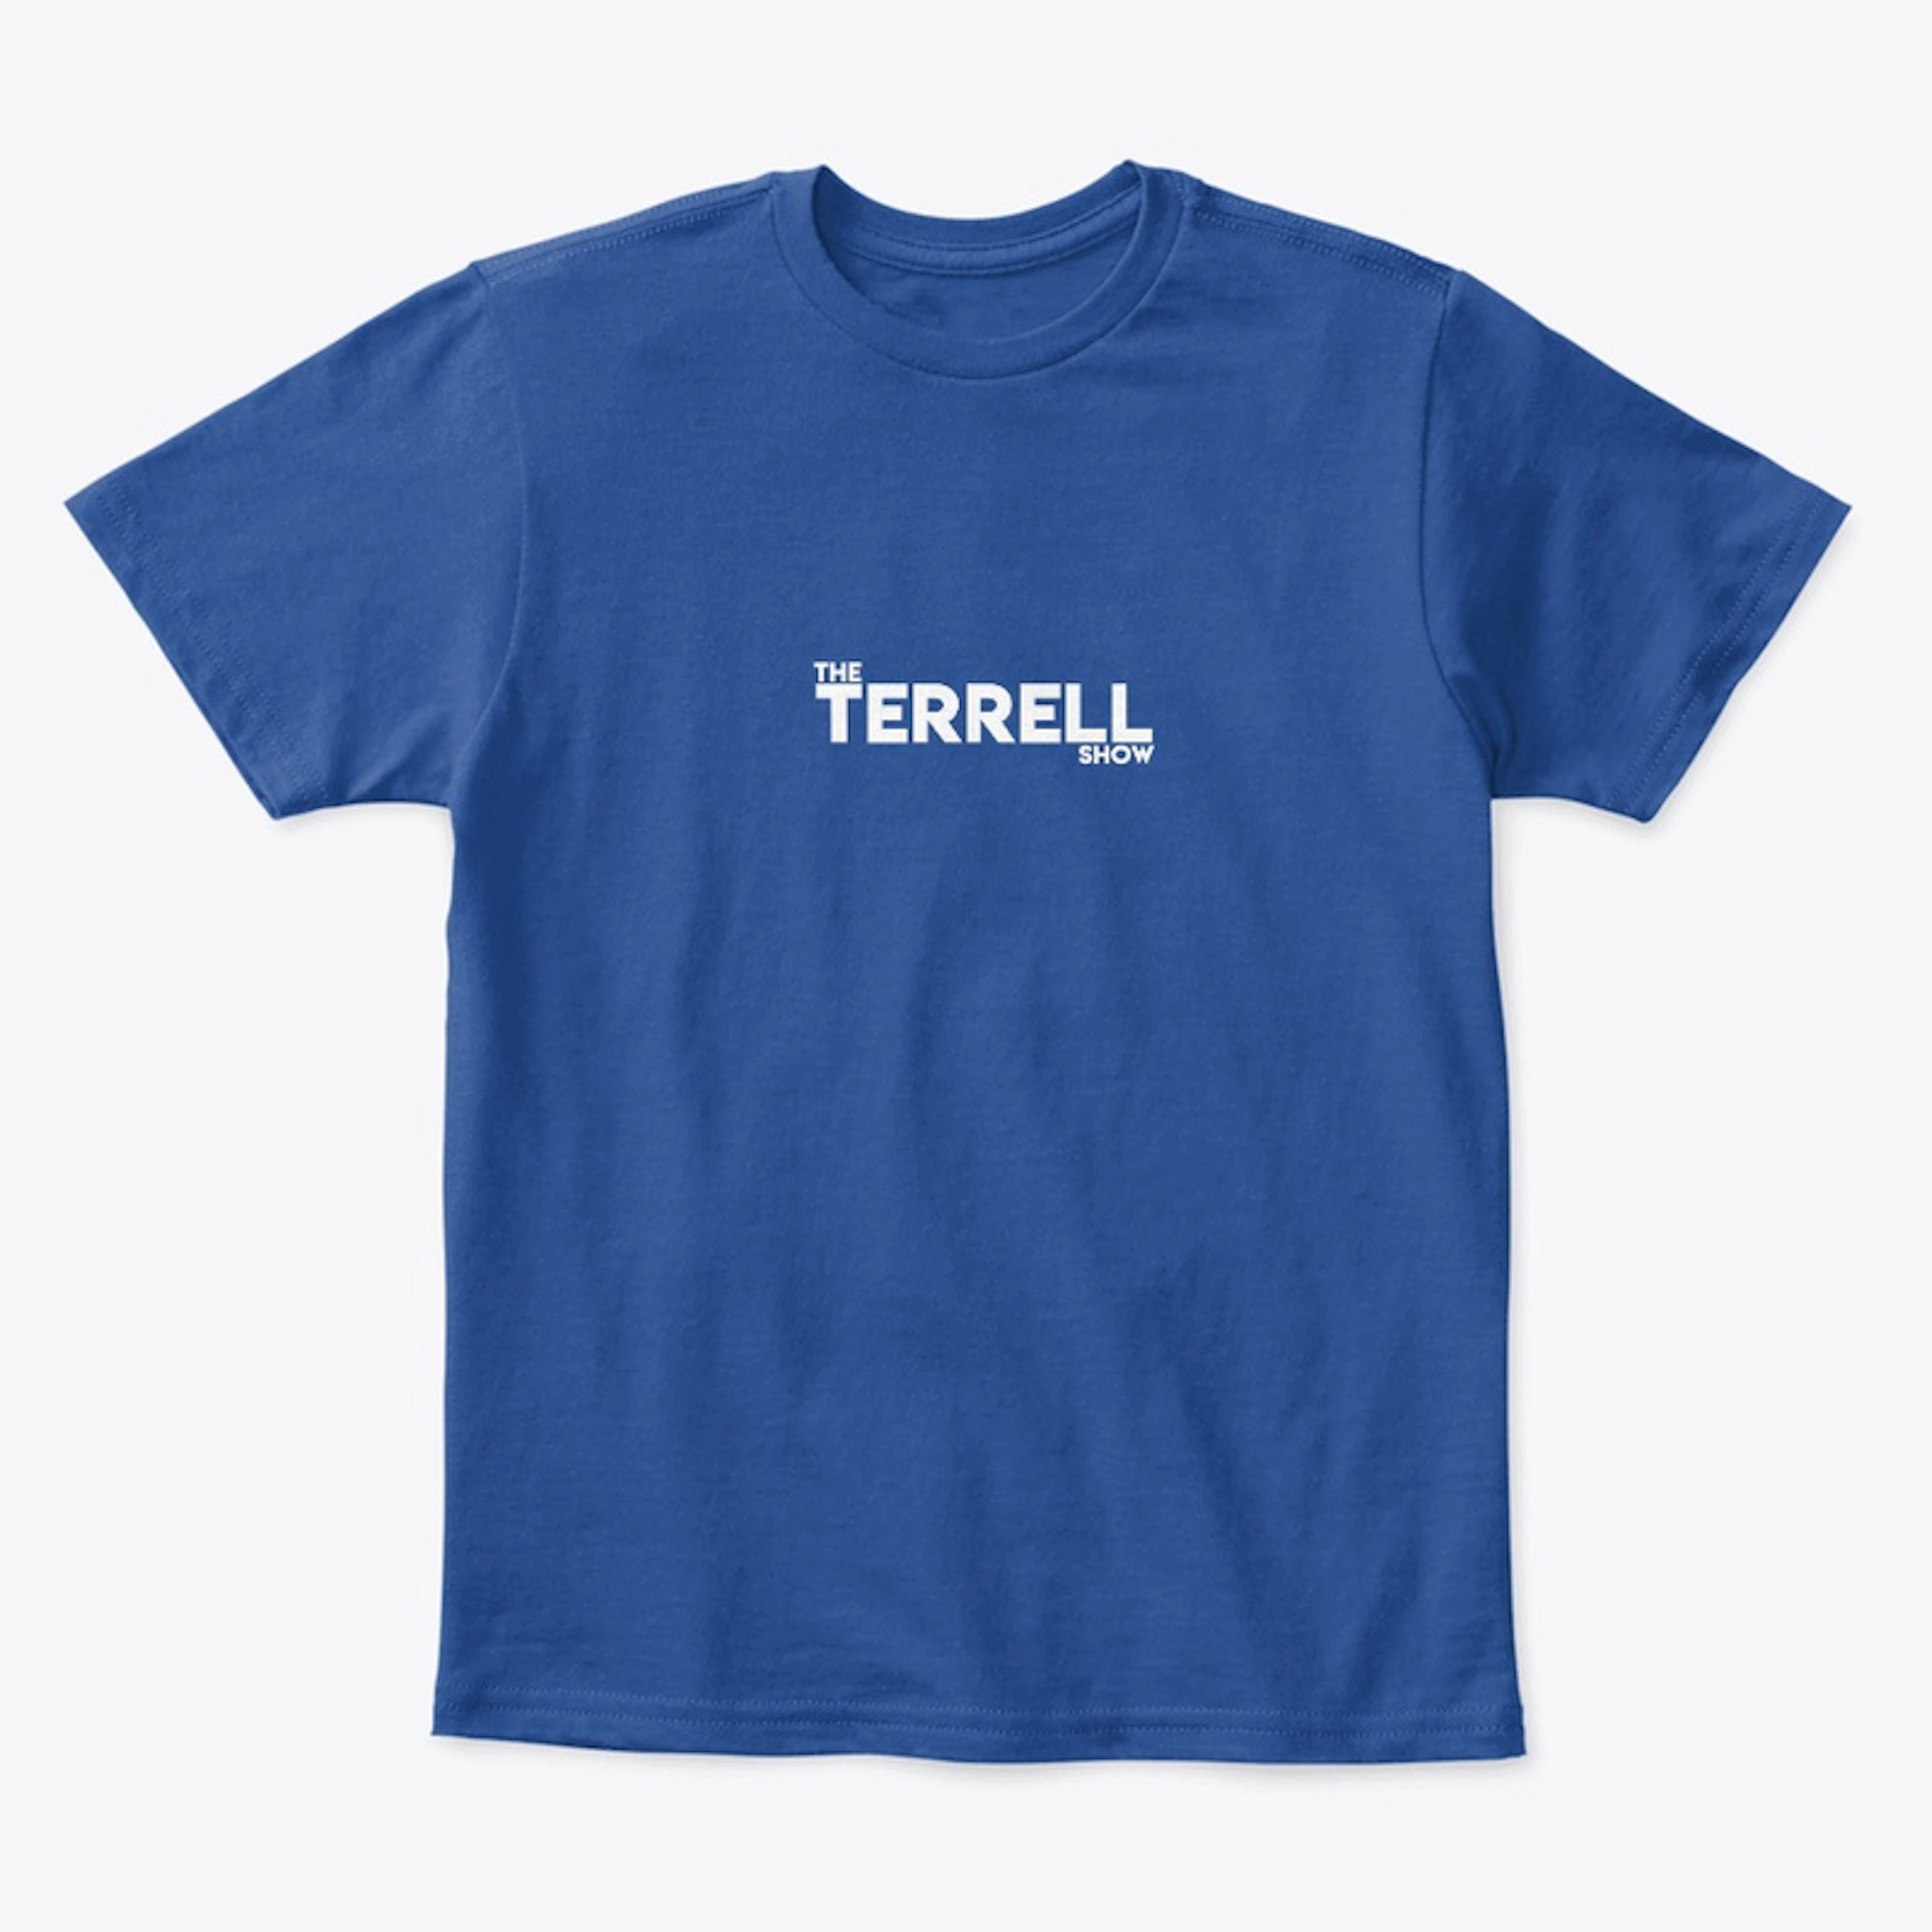 The TERRELL Show